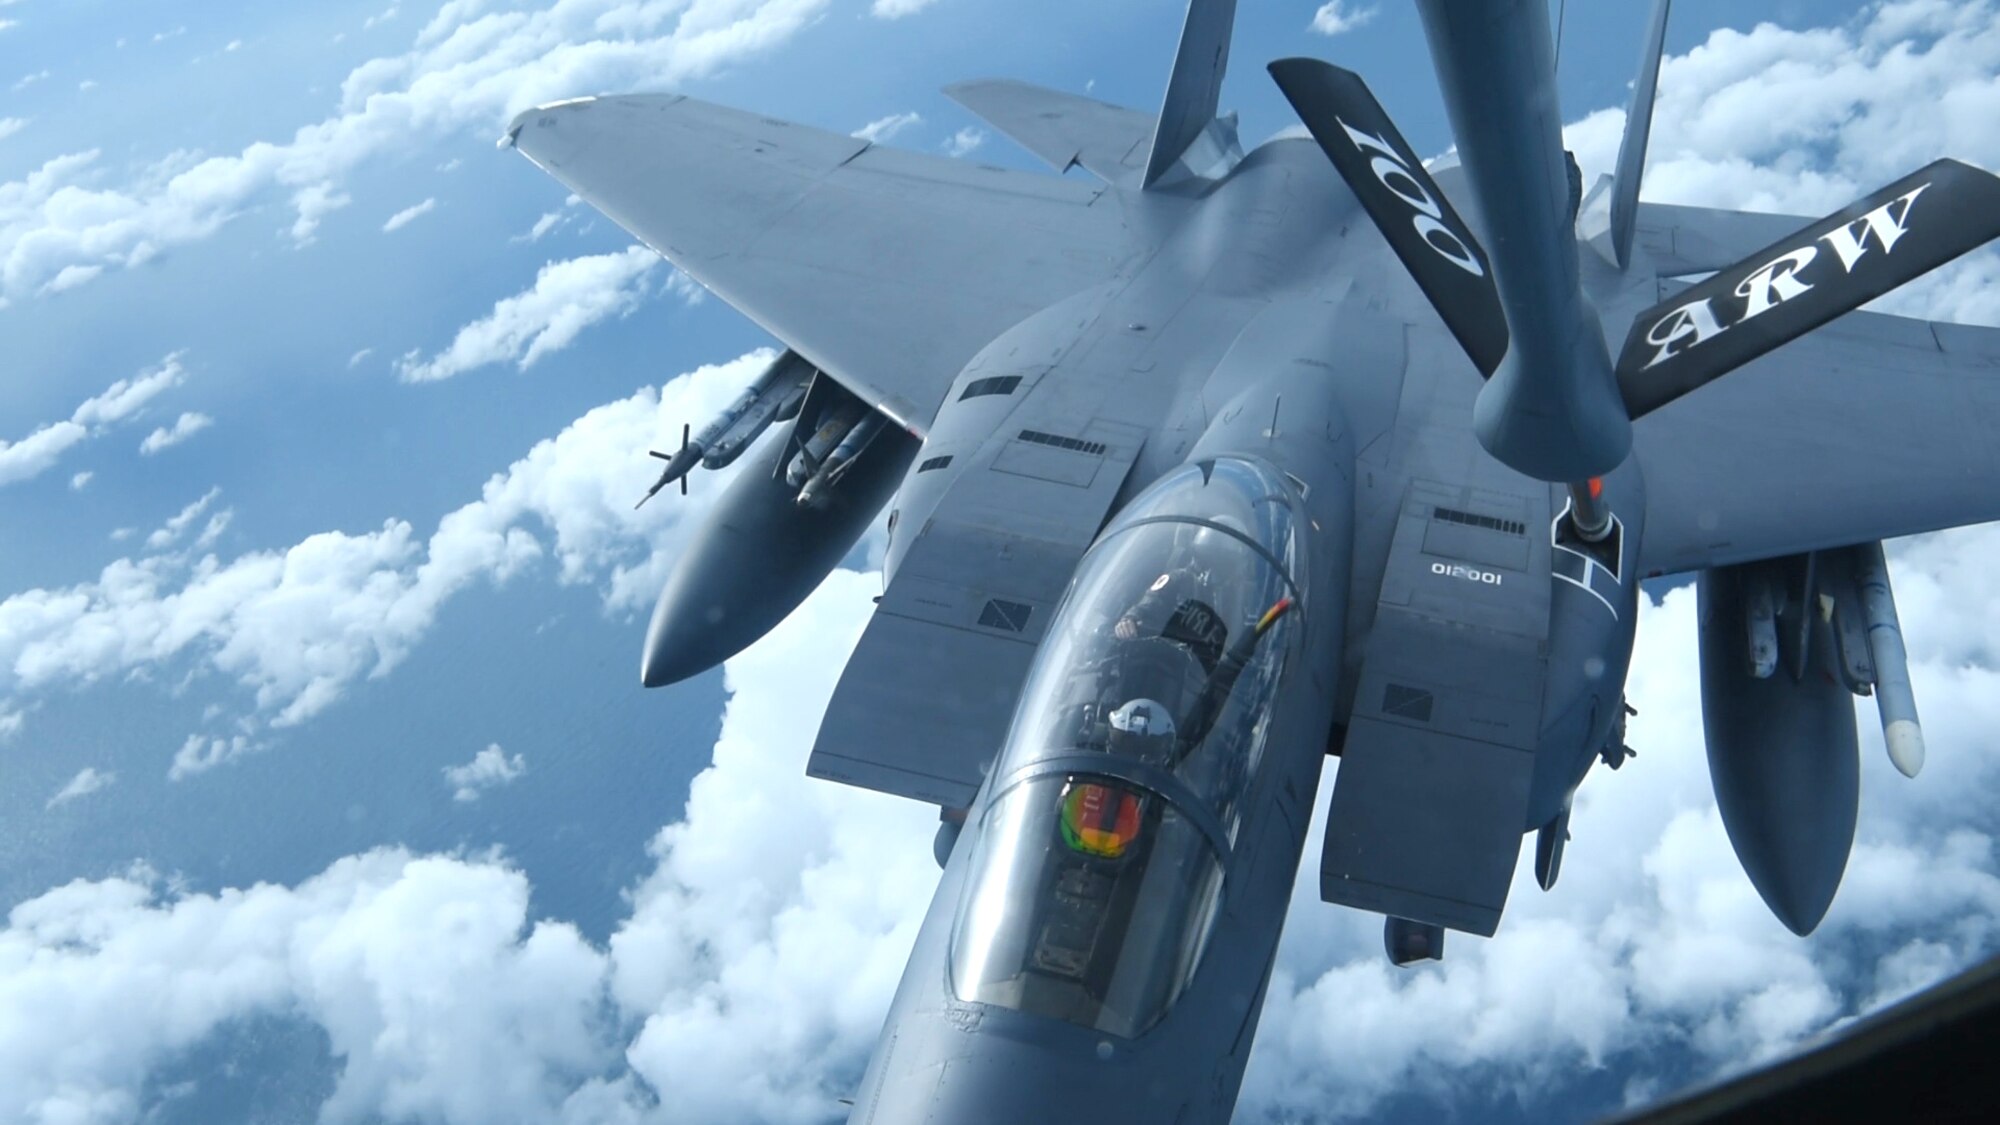 An F-15E Strike Eagle assigned to the 48th Fighter Wing at RAF Lakenheath, England, receives fuel from a KC-135 Stratotanker assigned to the 100th Air Refueling Wing during a readiness exercise over England, Oct. 3, 2019. Exercise scenarios were designed to ensure 100th ARW Airmen were fully prepared for potential contingencies in the wing’s area of responsibility. (U.S. Air Force photo by Airman 1st Class David Busby)